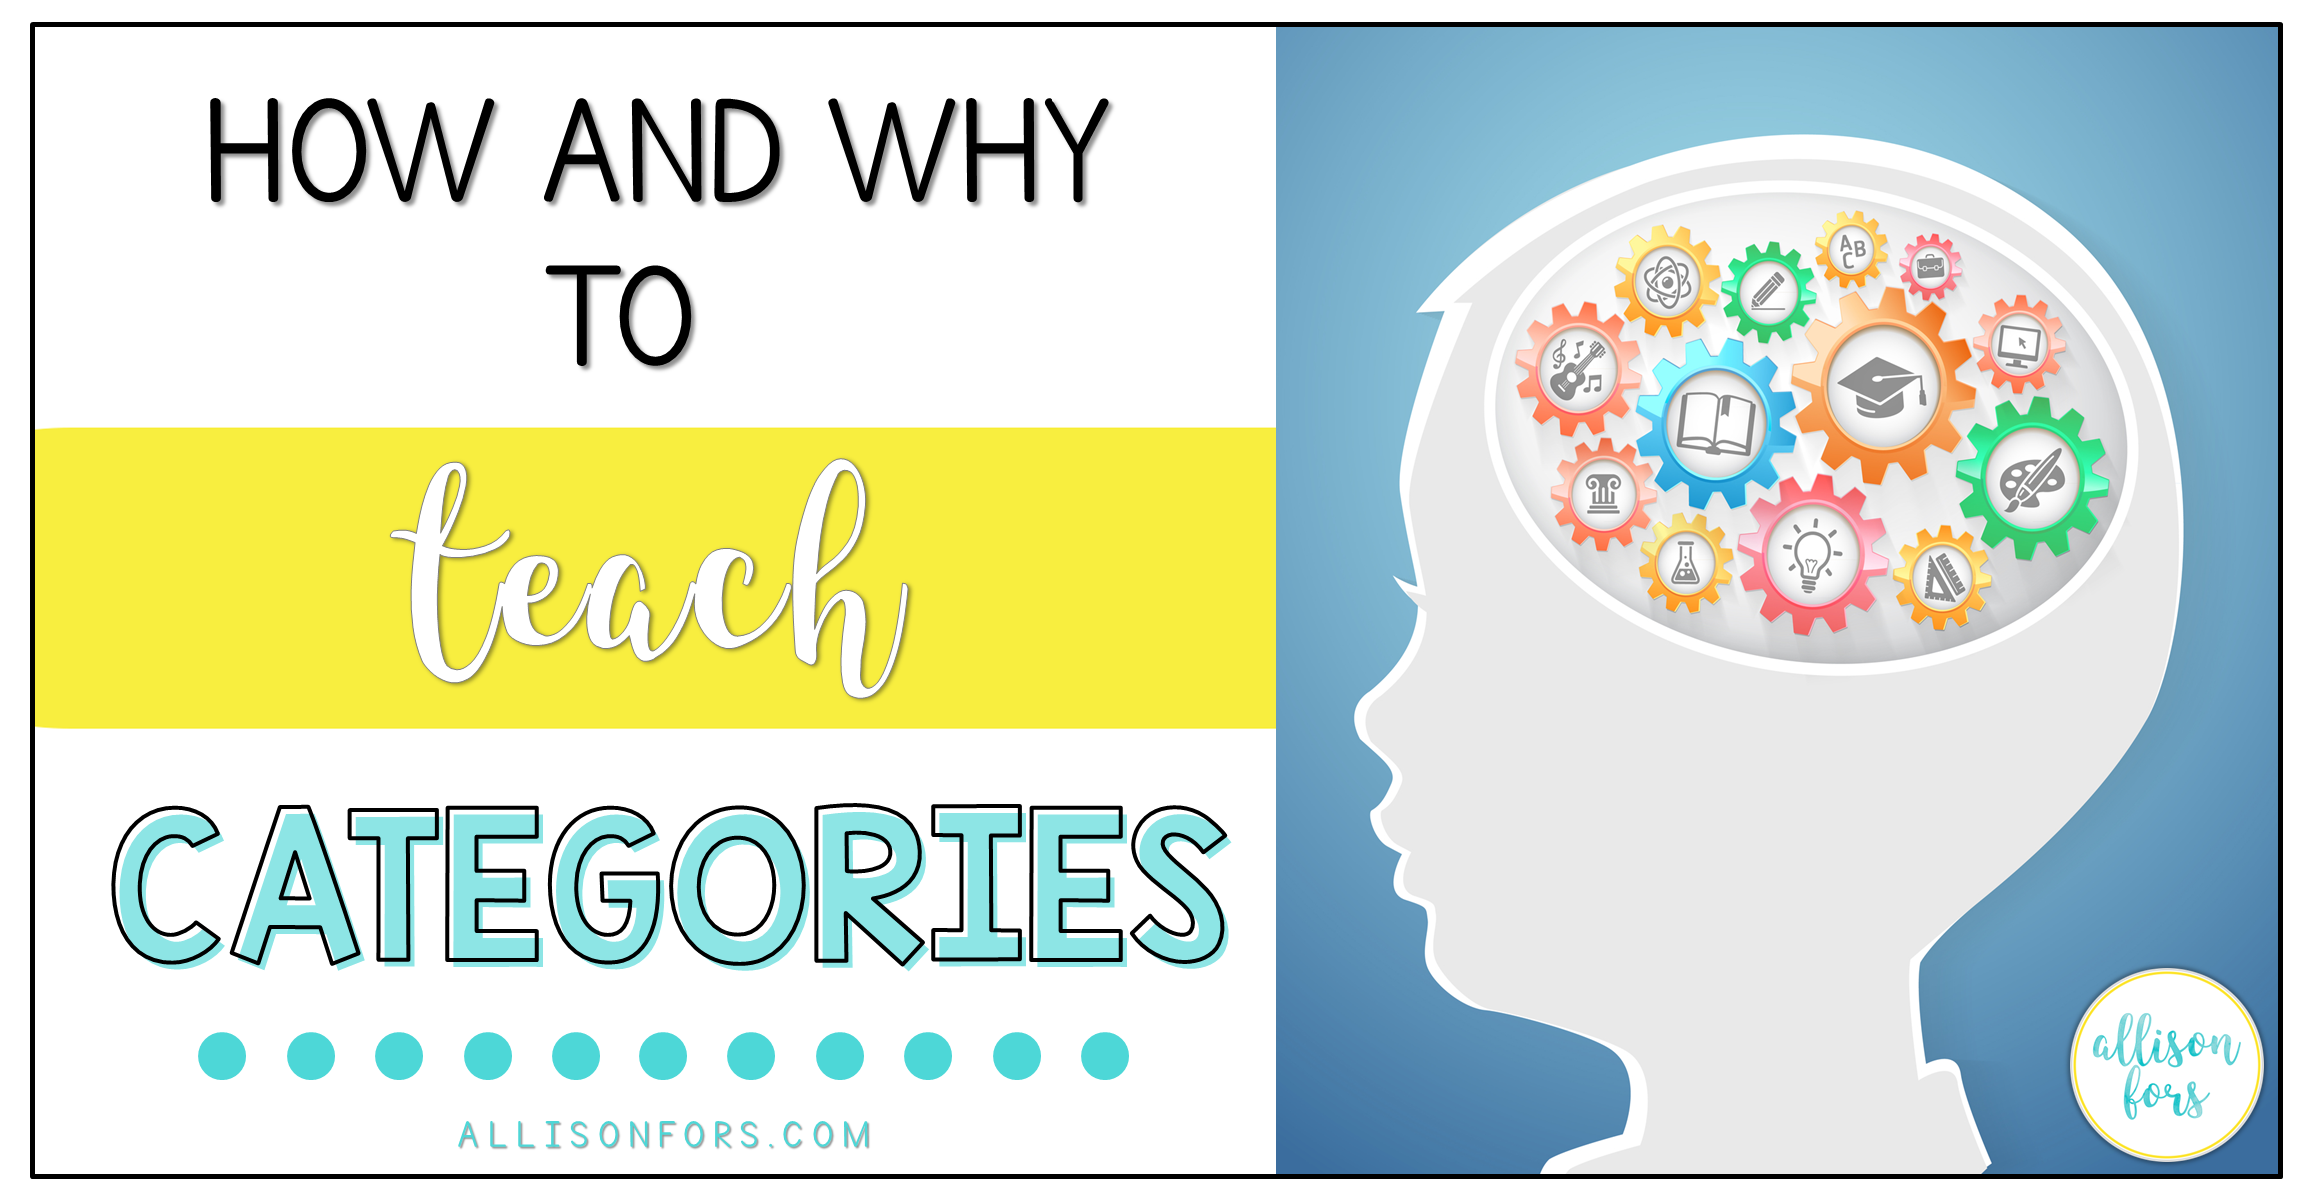 How and why to Teach Categories in Speech Therapy